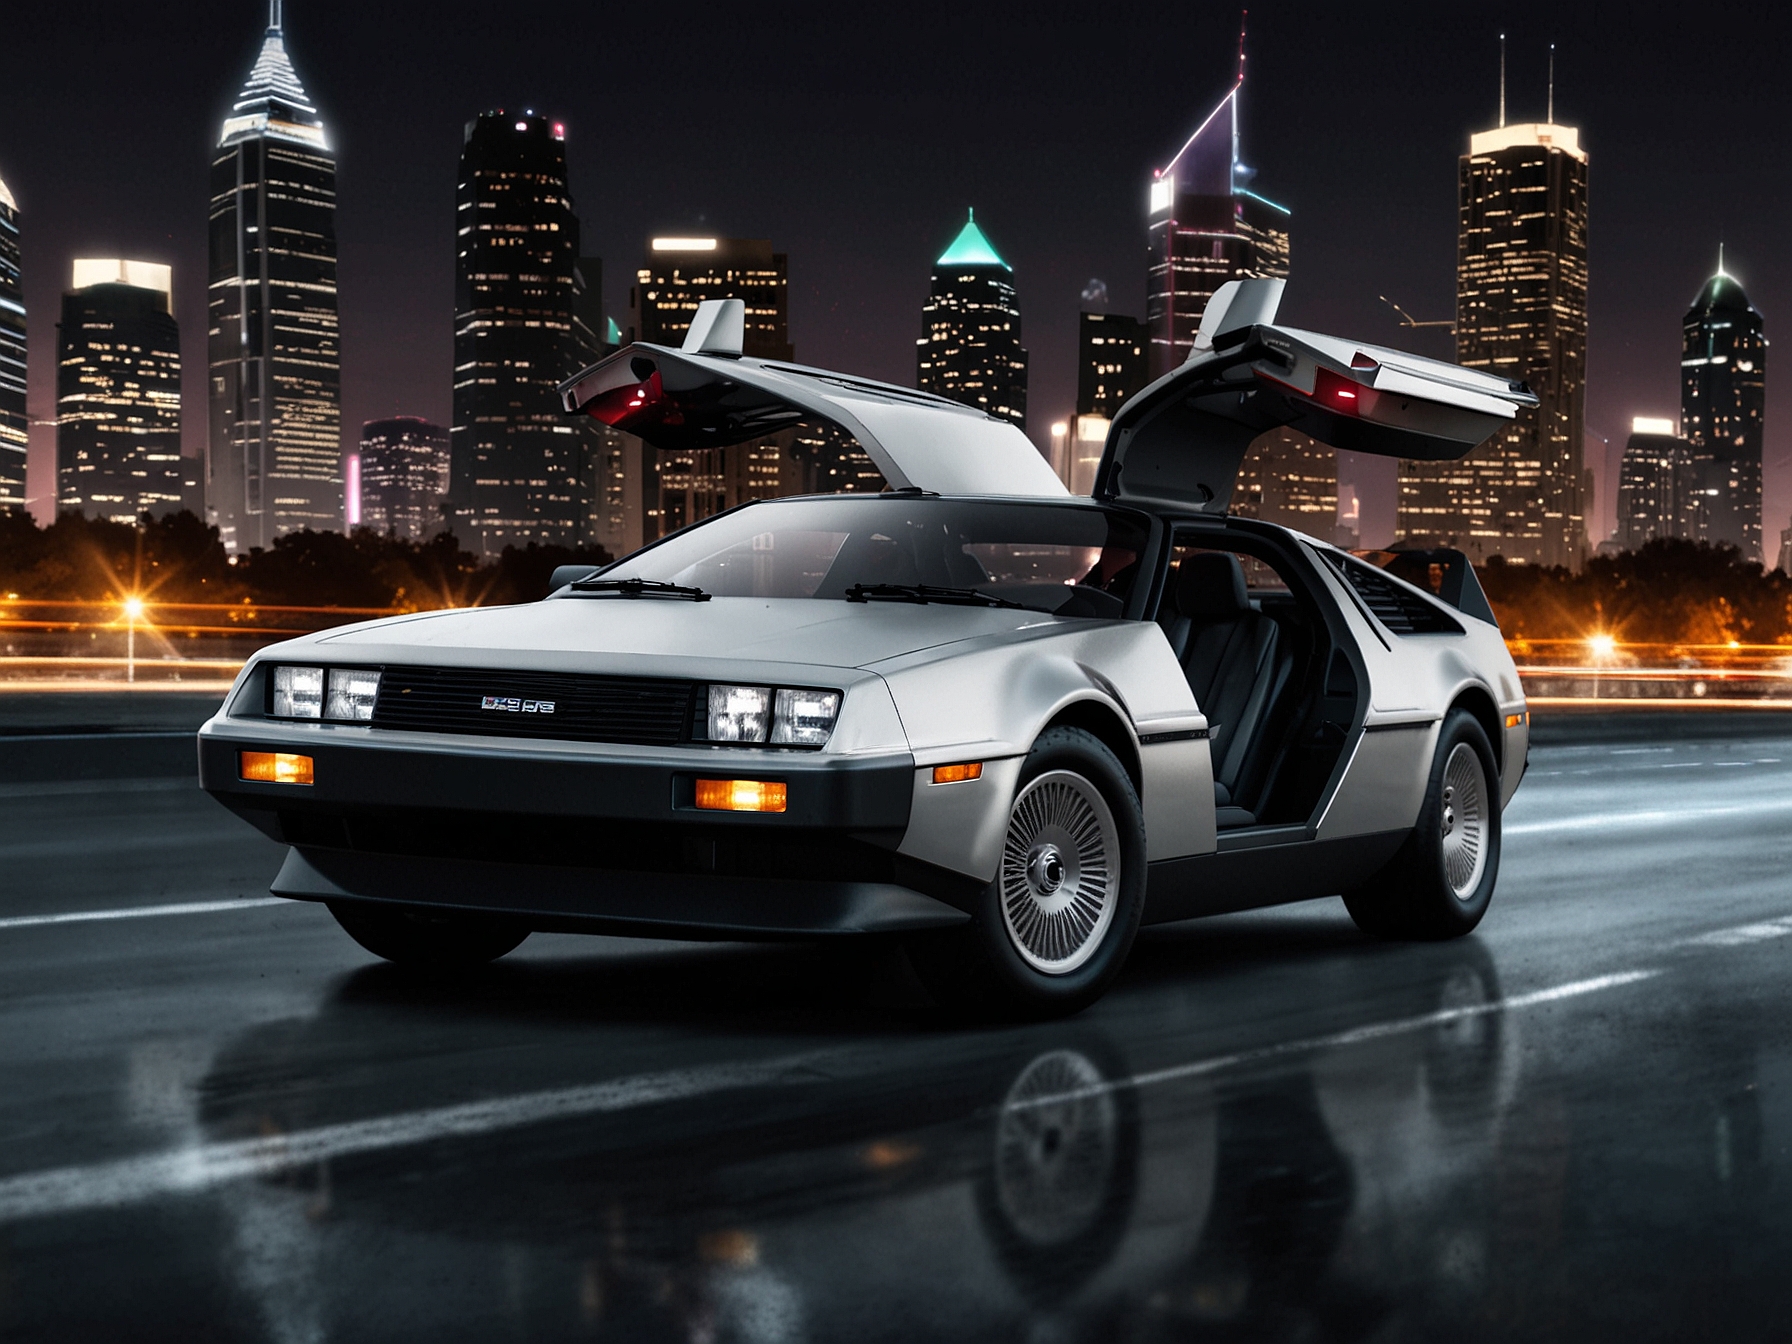 A sleek, futuristic DeLorean EV with its iconic gull-wing doors open, showcasing its aerodynamic design and stainless steel body under a vibrant, modern cityscape.